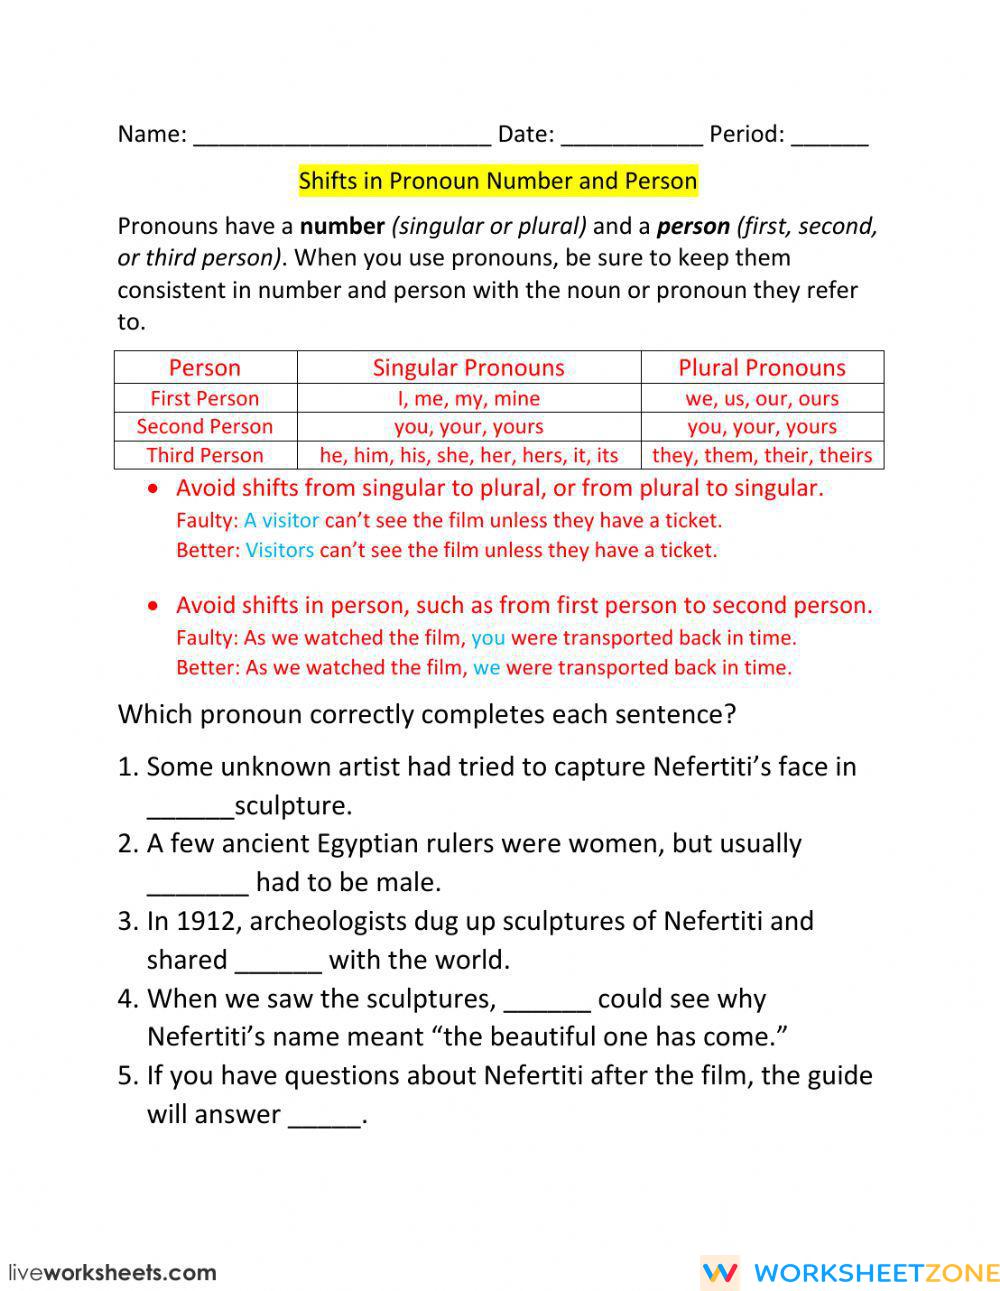 lesson-5-shifts-in-pronoun-number-and-person-worksheet-zone